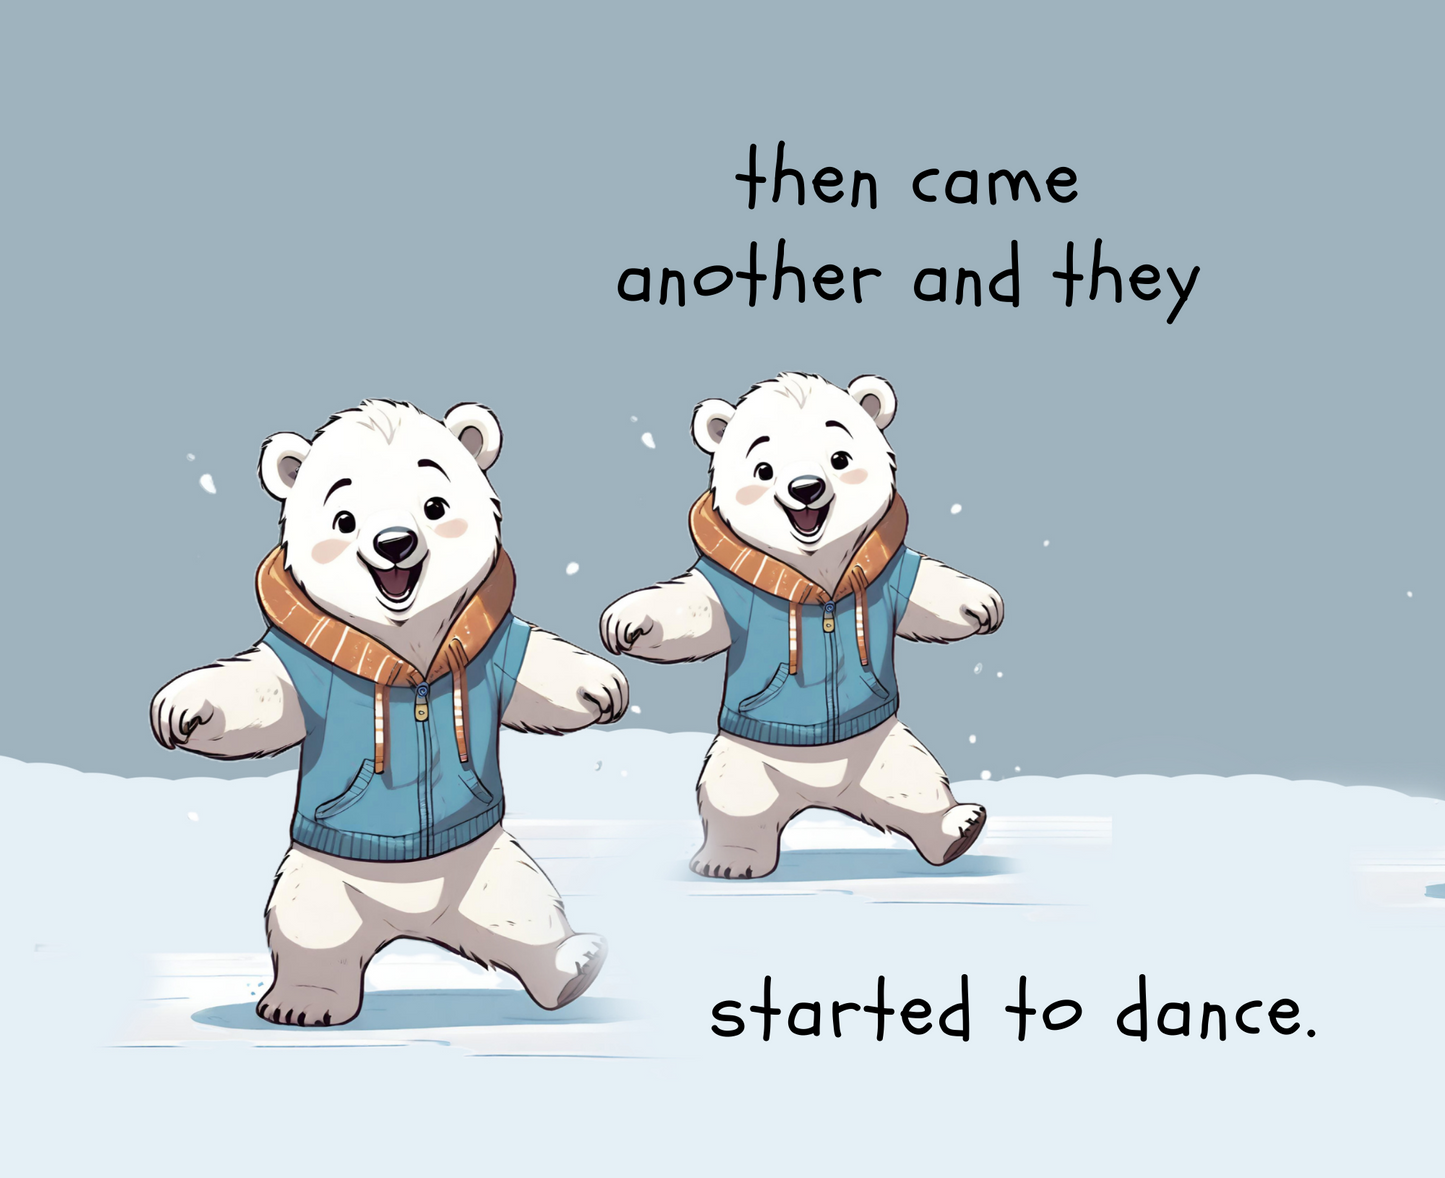 10 Little Polar Bears: Learn to count from one to Ten E-BOOK